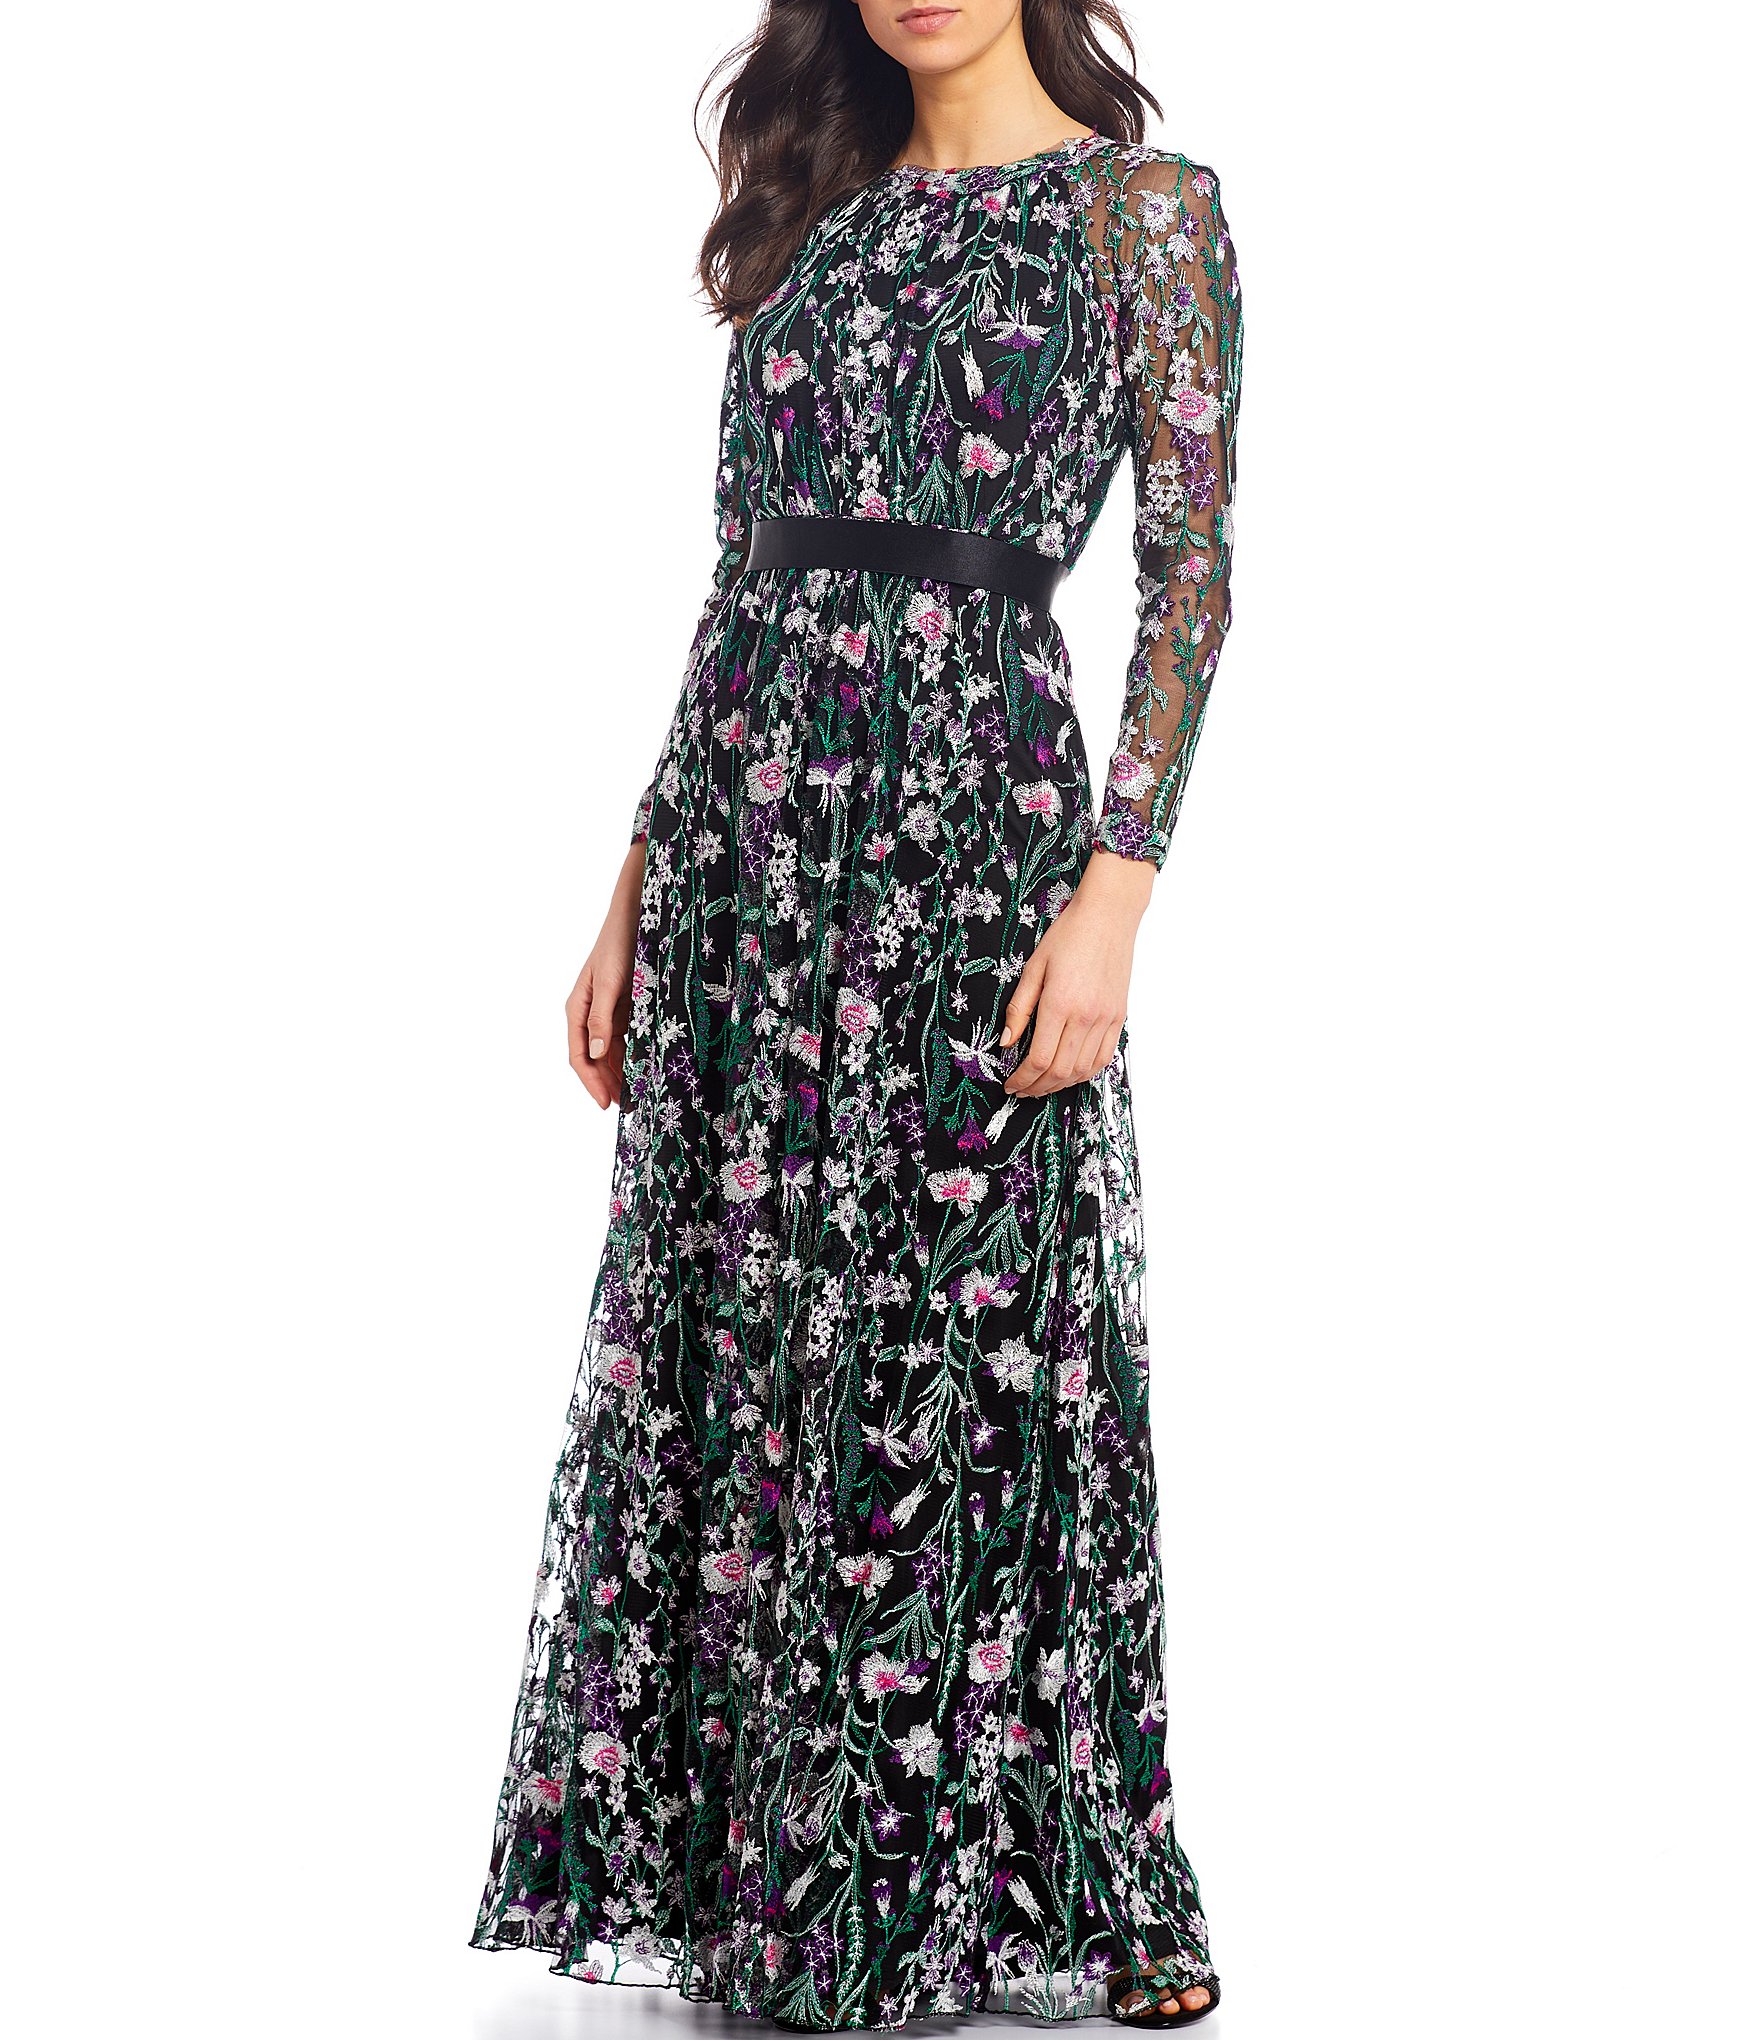 embroidered floral mesh dress